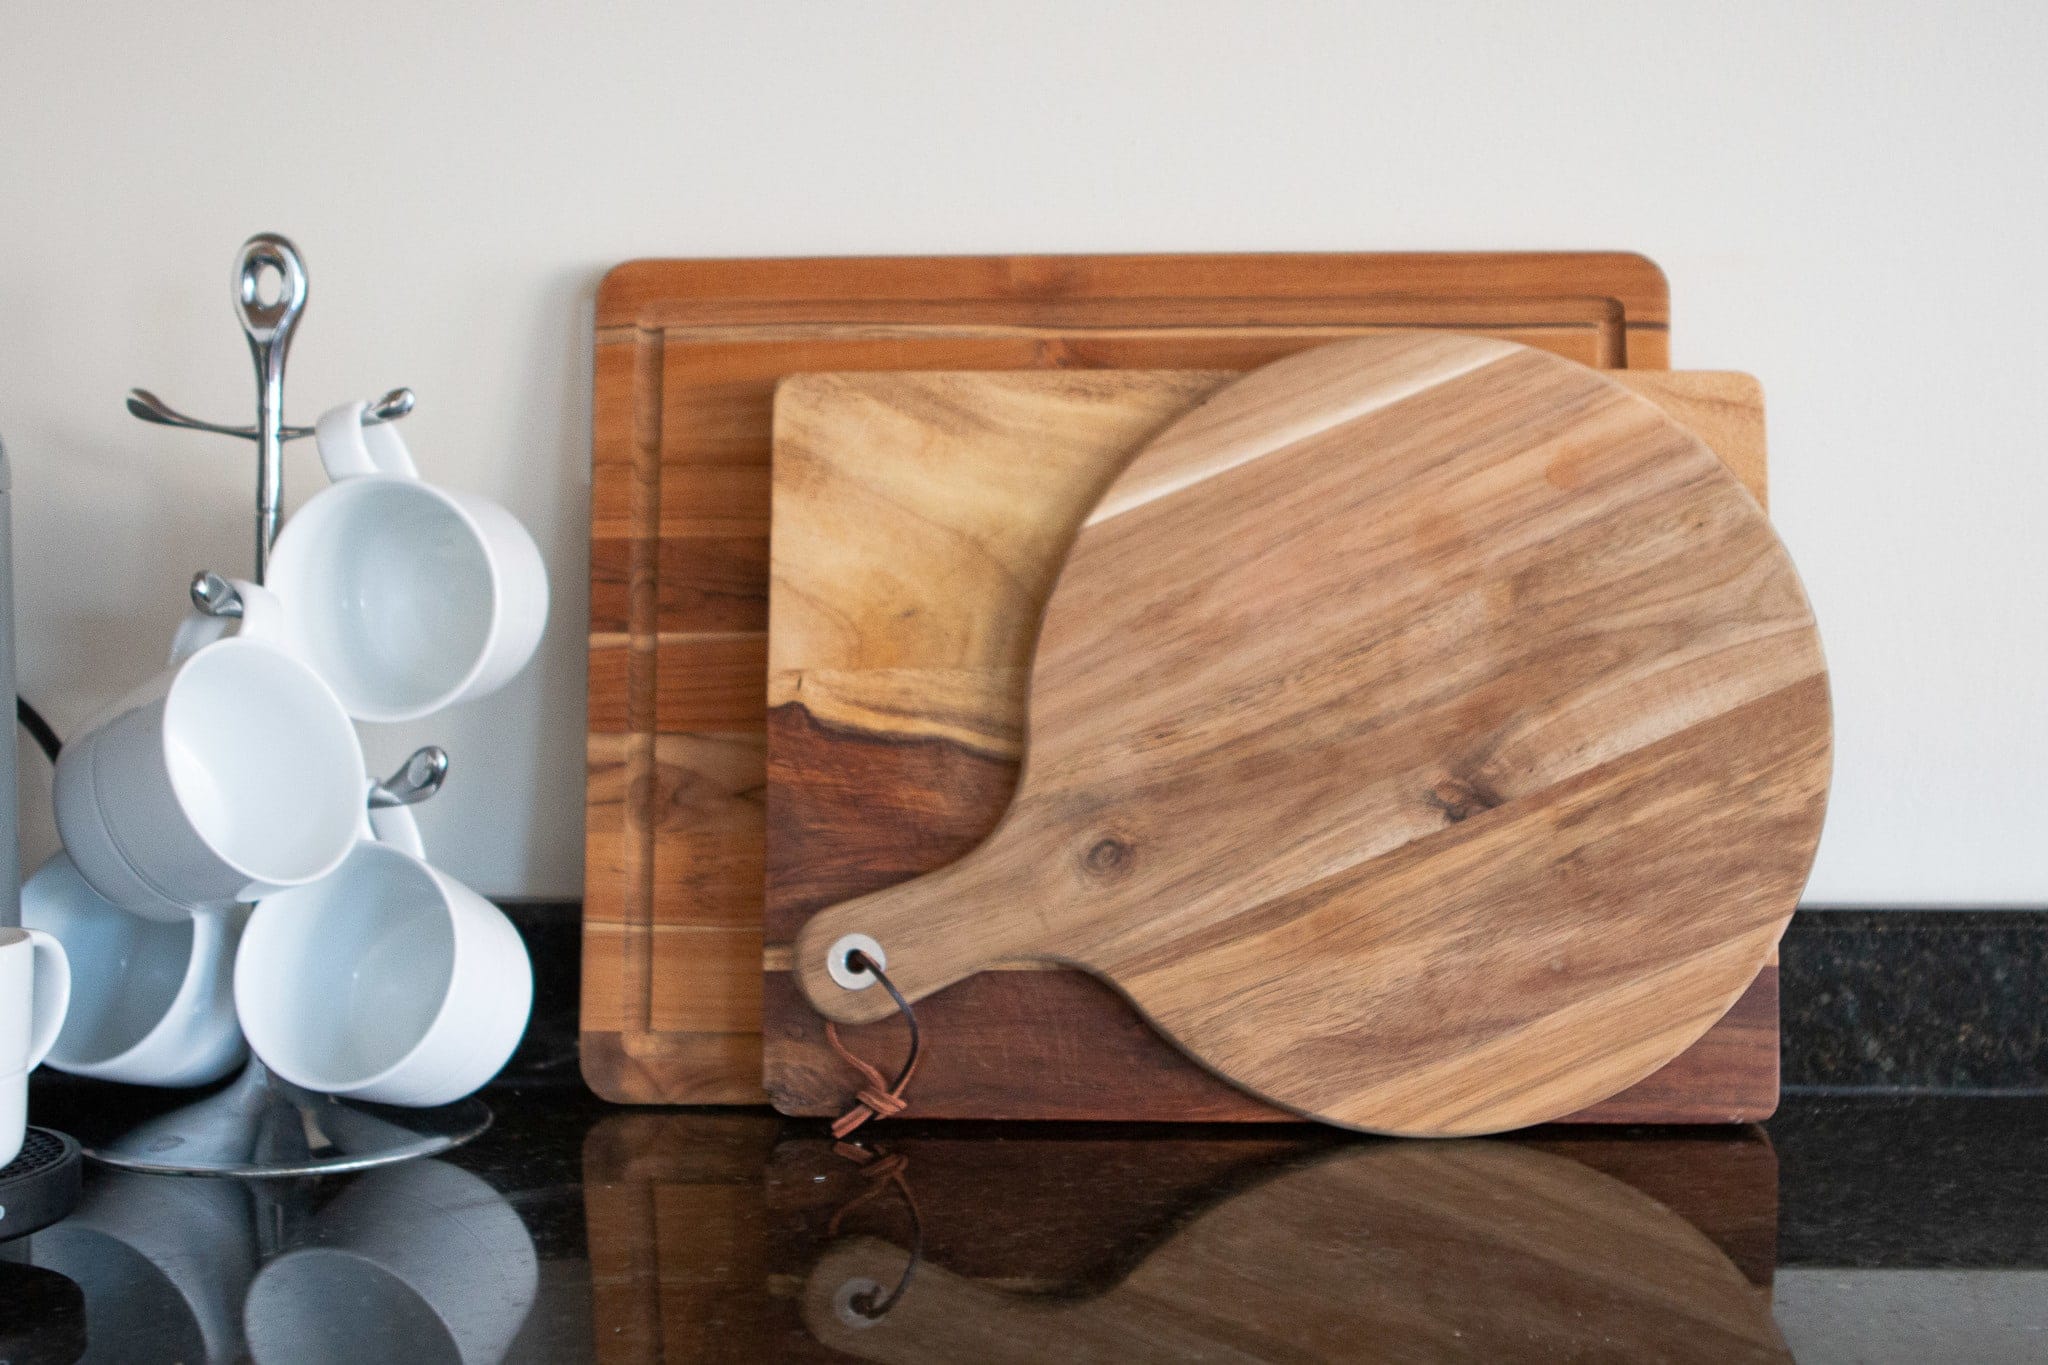 Layer cutting boards in your kitchen